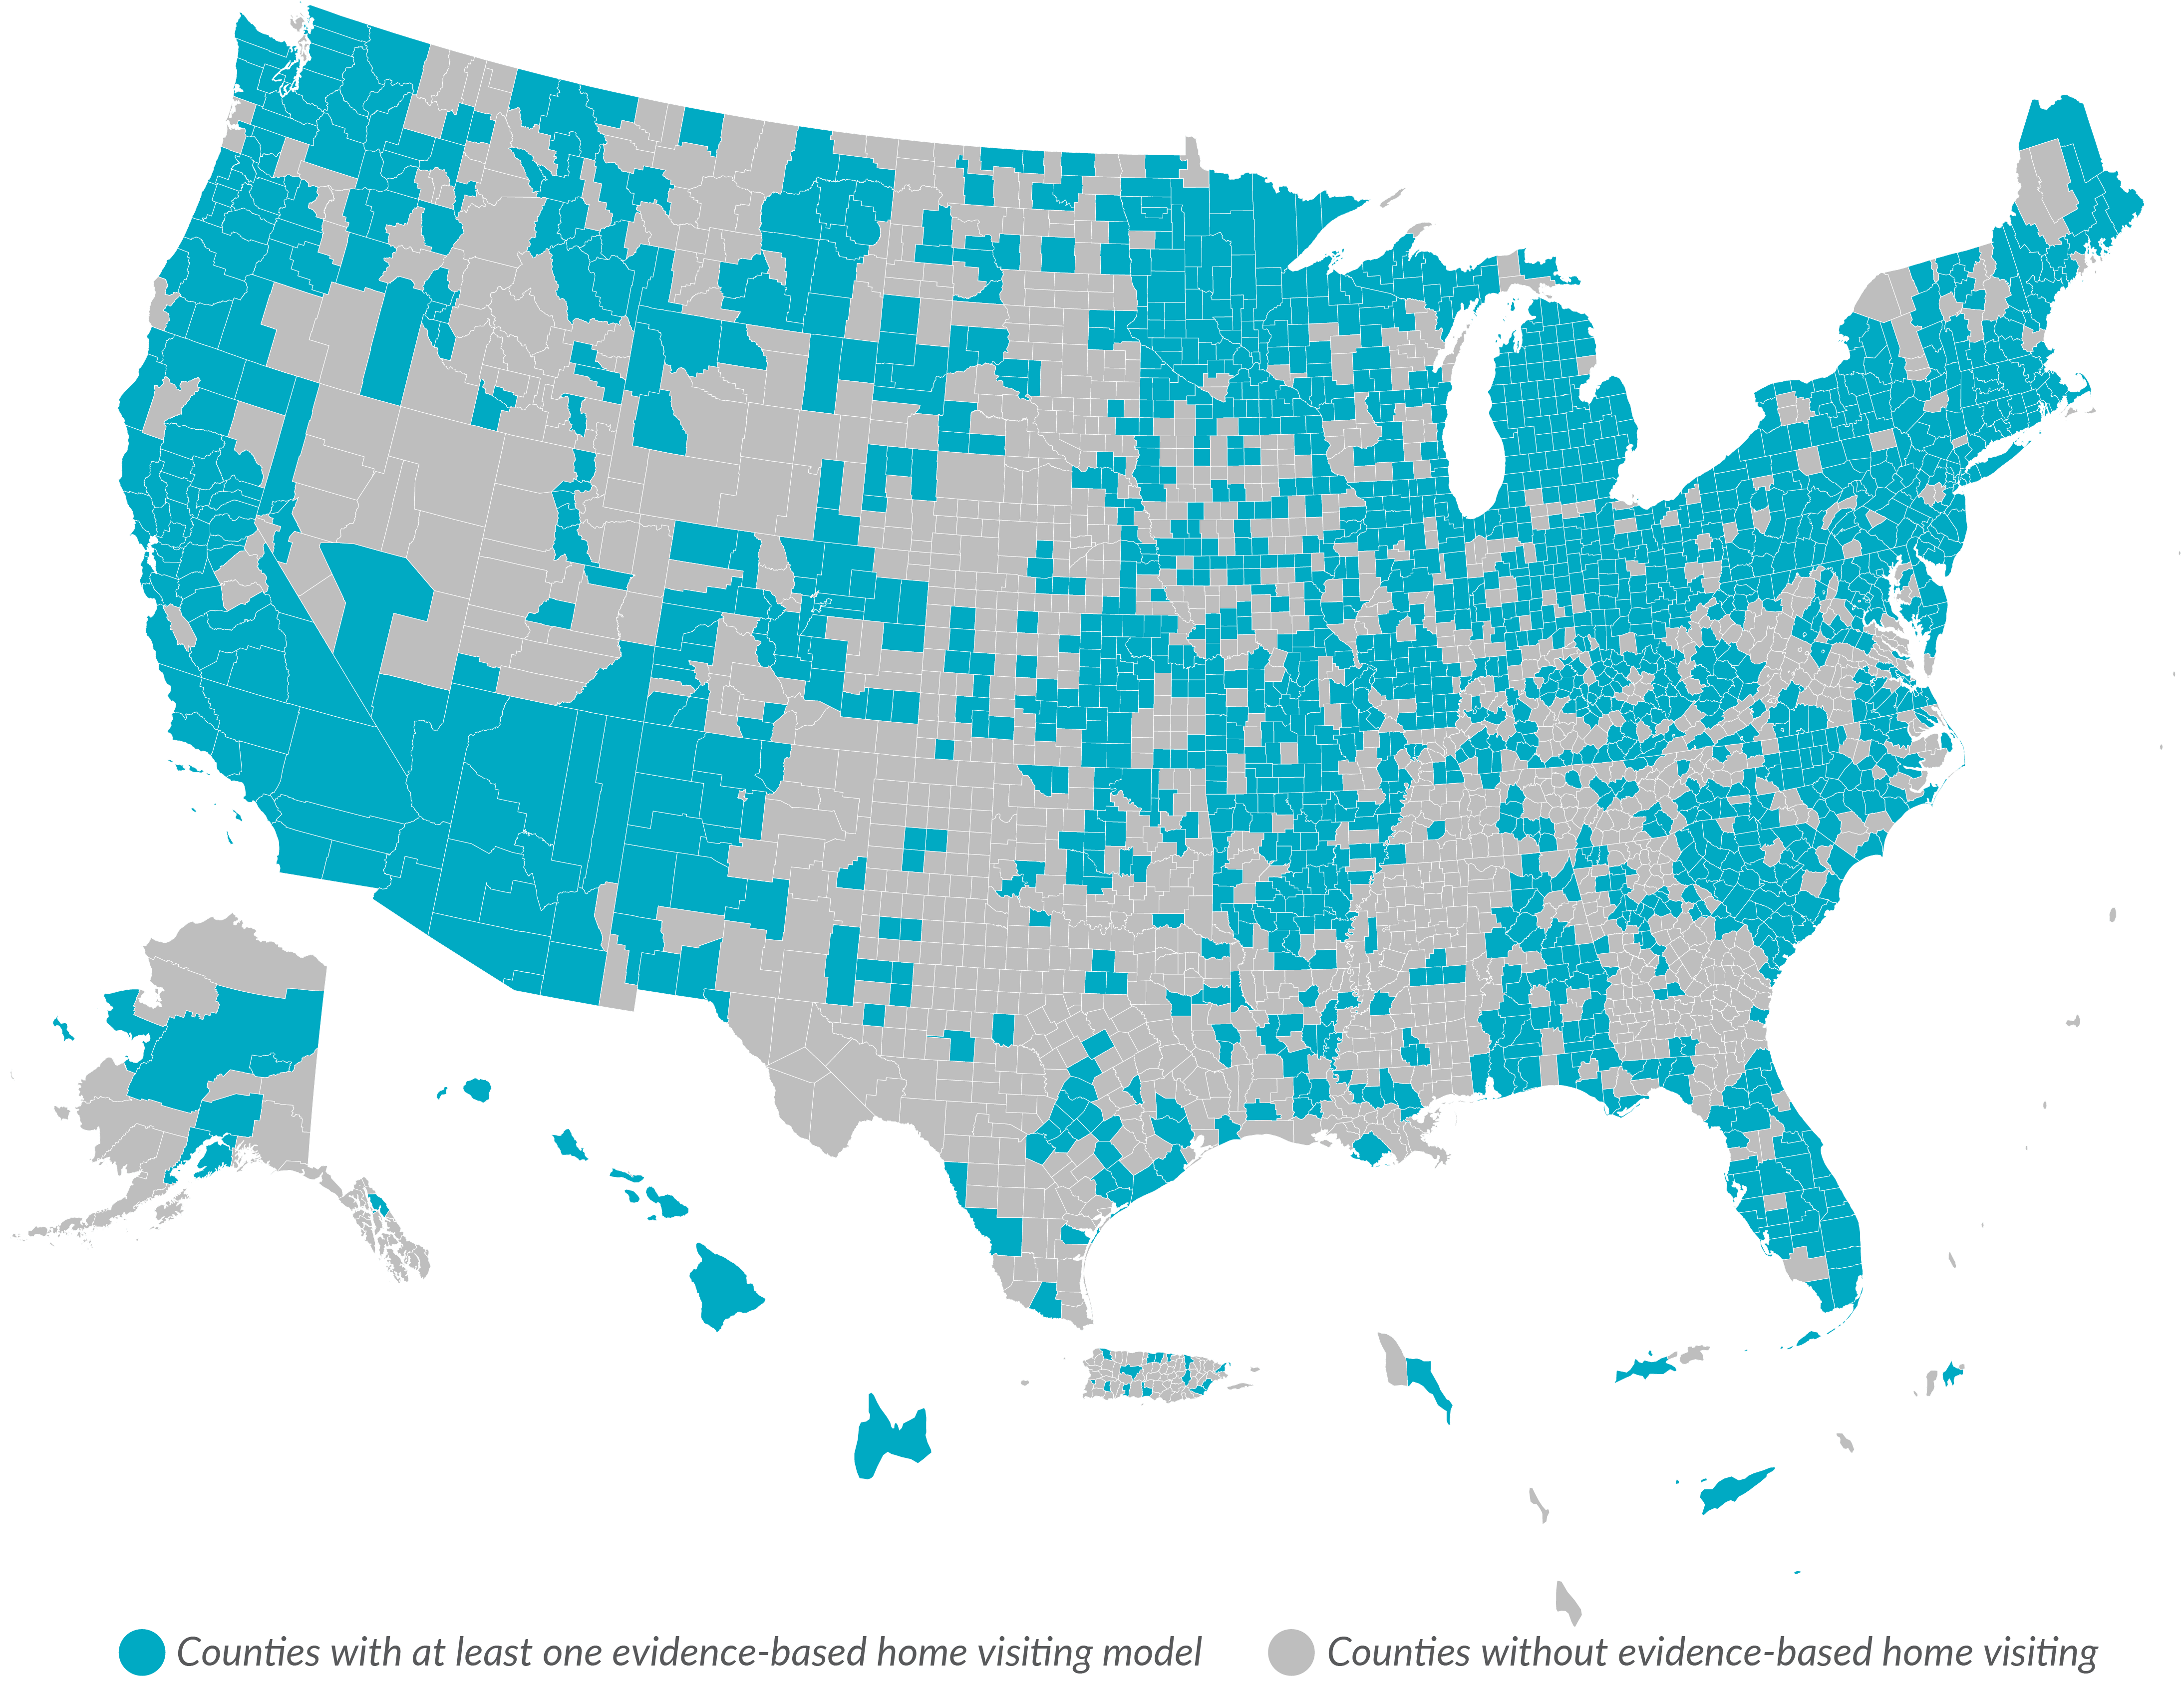 Map showing evidence-based home visiting by county. Counties with at least one evidence-based home visiting model are shaded blue.